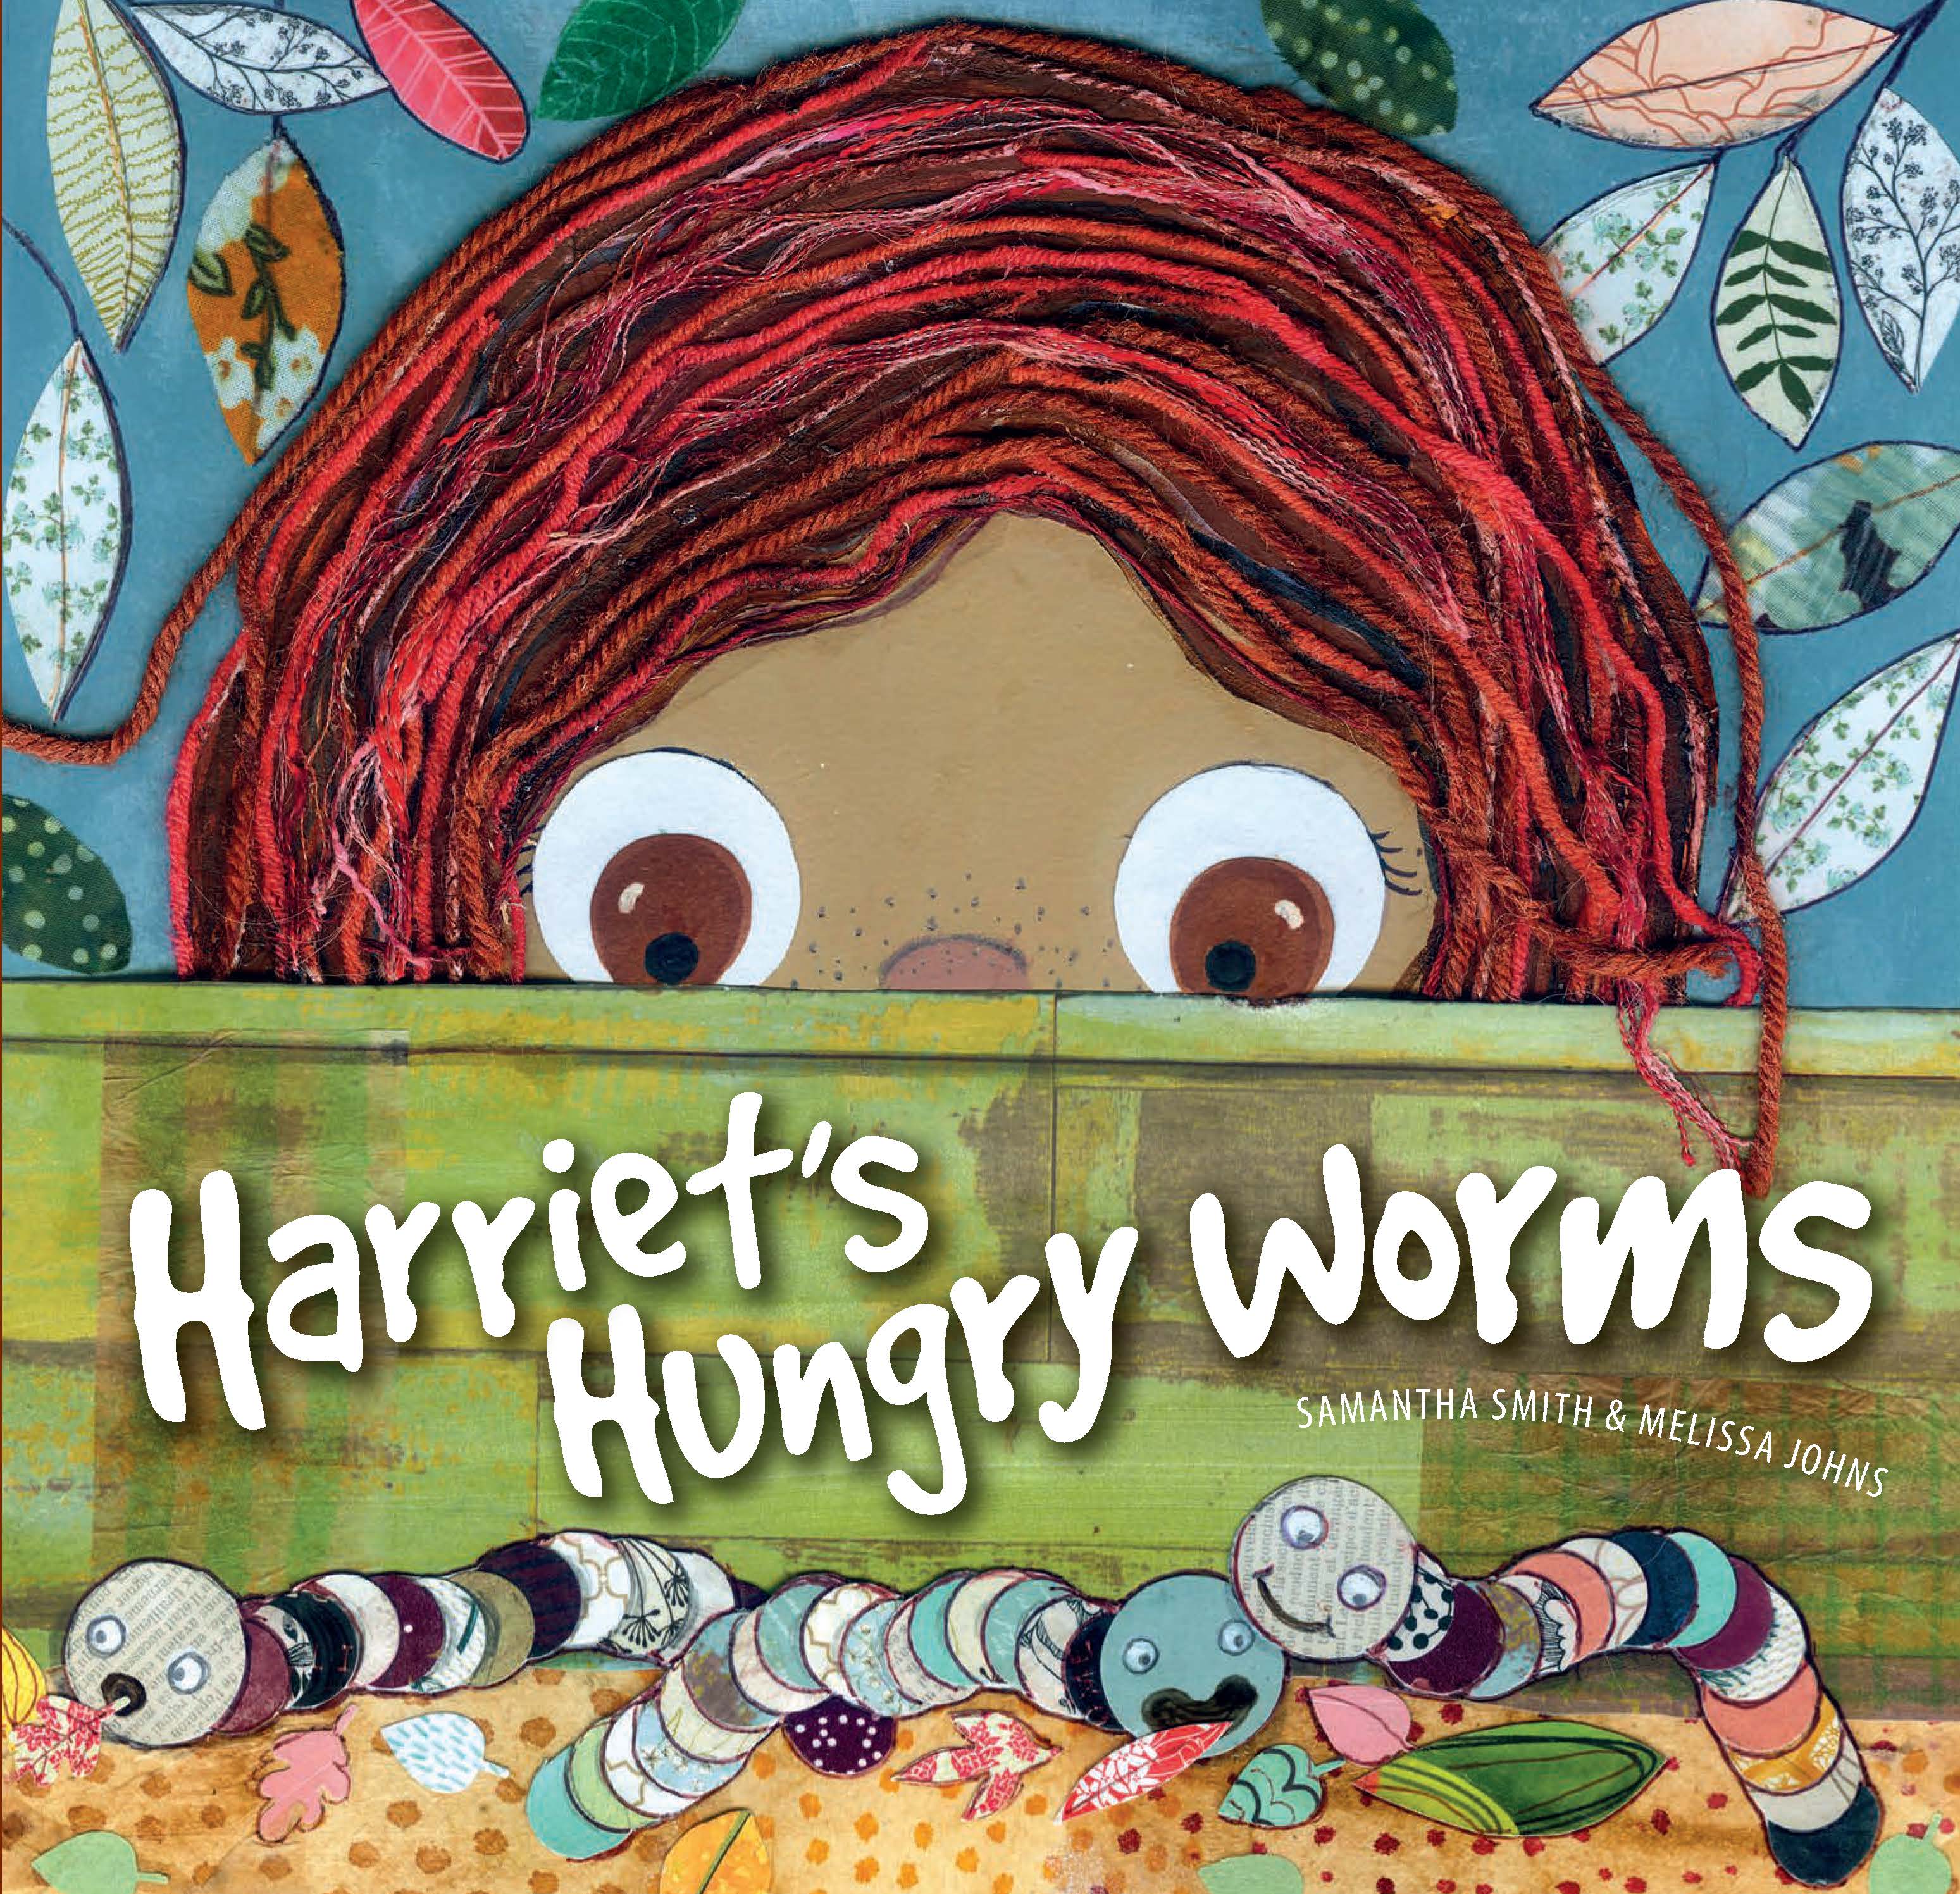 Harriet’s Hungry Worms by Samantha Smith